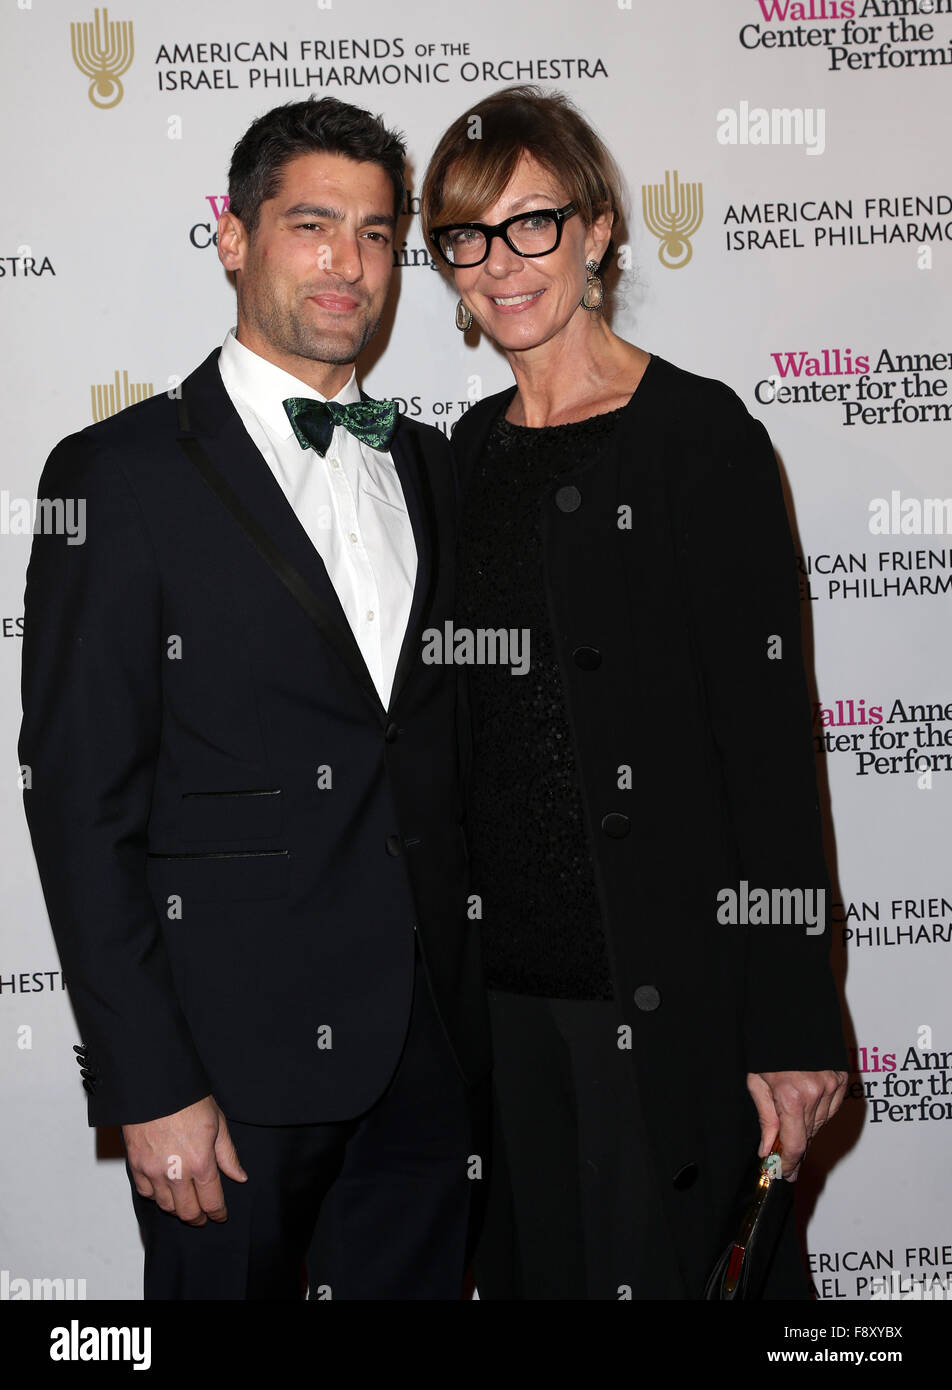 American Friends Of The Israel Philharmonic Orchestra Duet Gala  Featuring: Allison Janney, Philip Joncas Where: Beverly Hills, California, United States When: 10 Nov 2015 Stock Photo